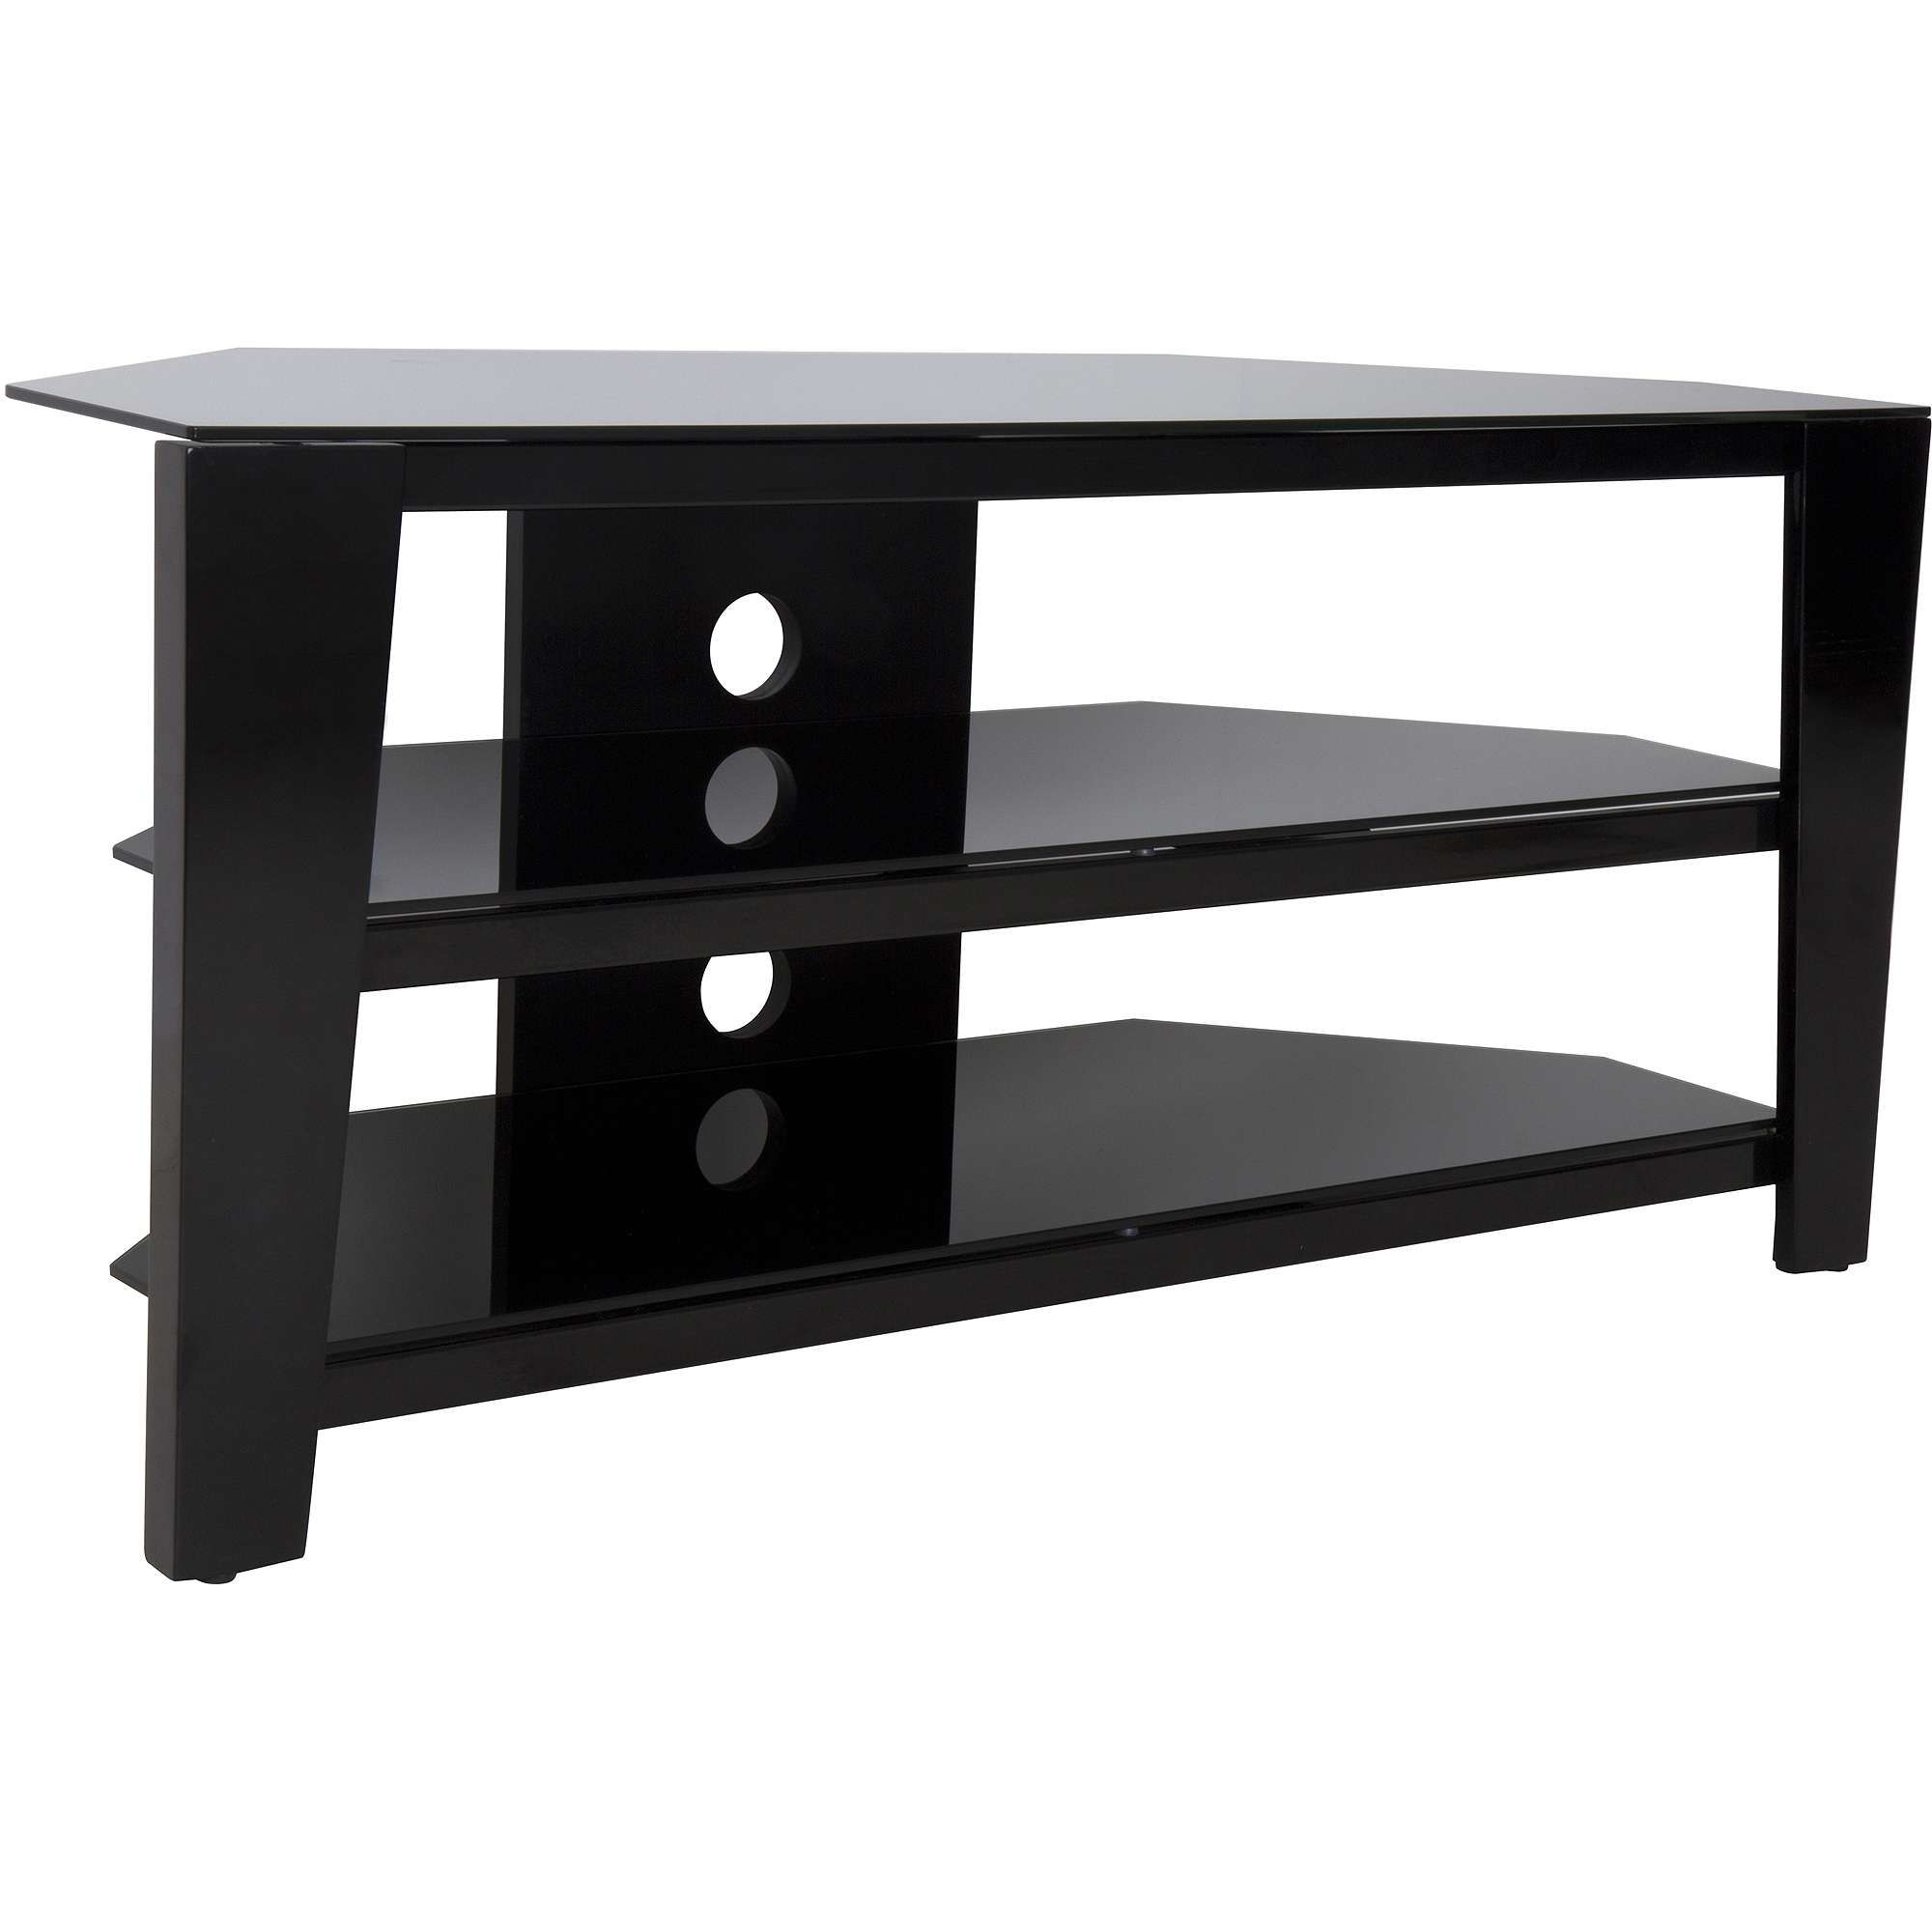 Tv Stands For Inch Cbf9311f02b7 1 Furnitures Avf Vico Black Stand Within Black Tv Stands (View 3 of 20)